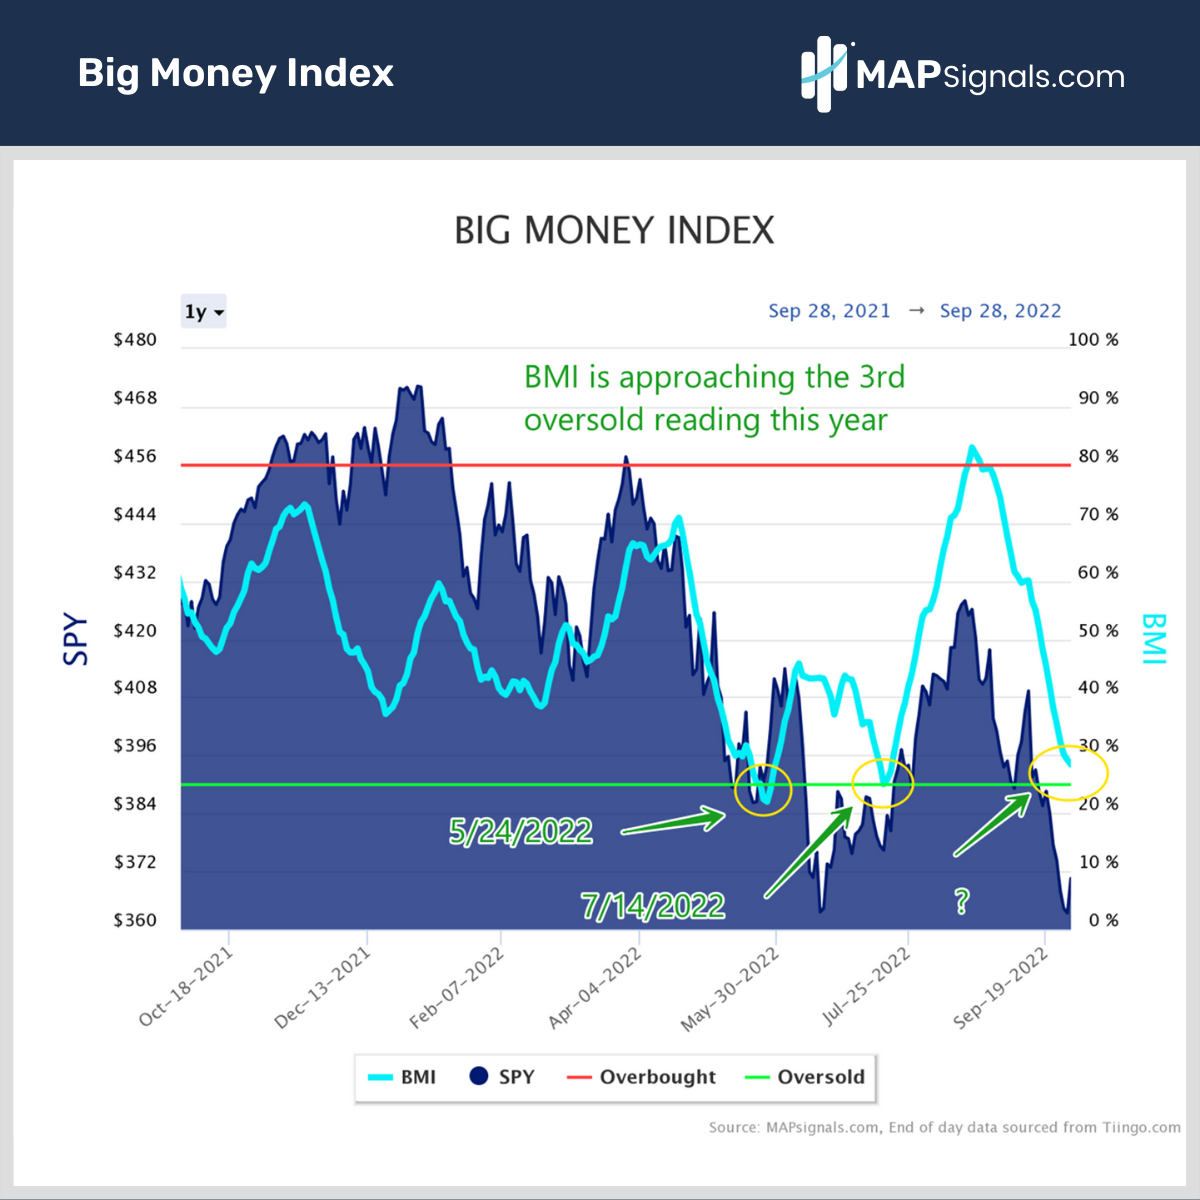 BMI is approaching 3rd oversold reading this year | Big Money Index